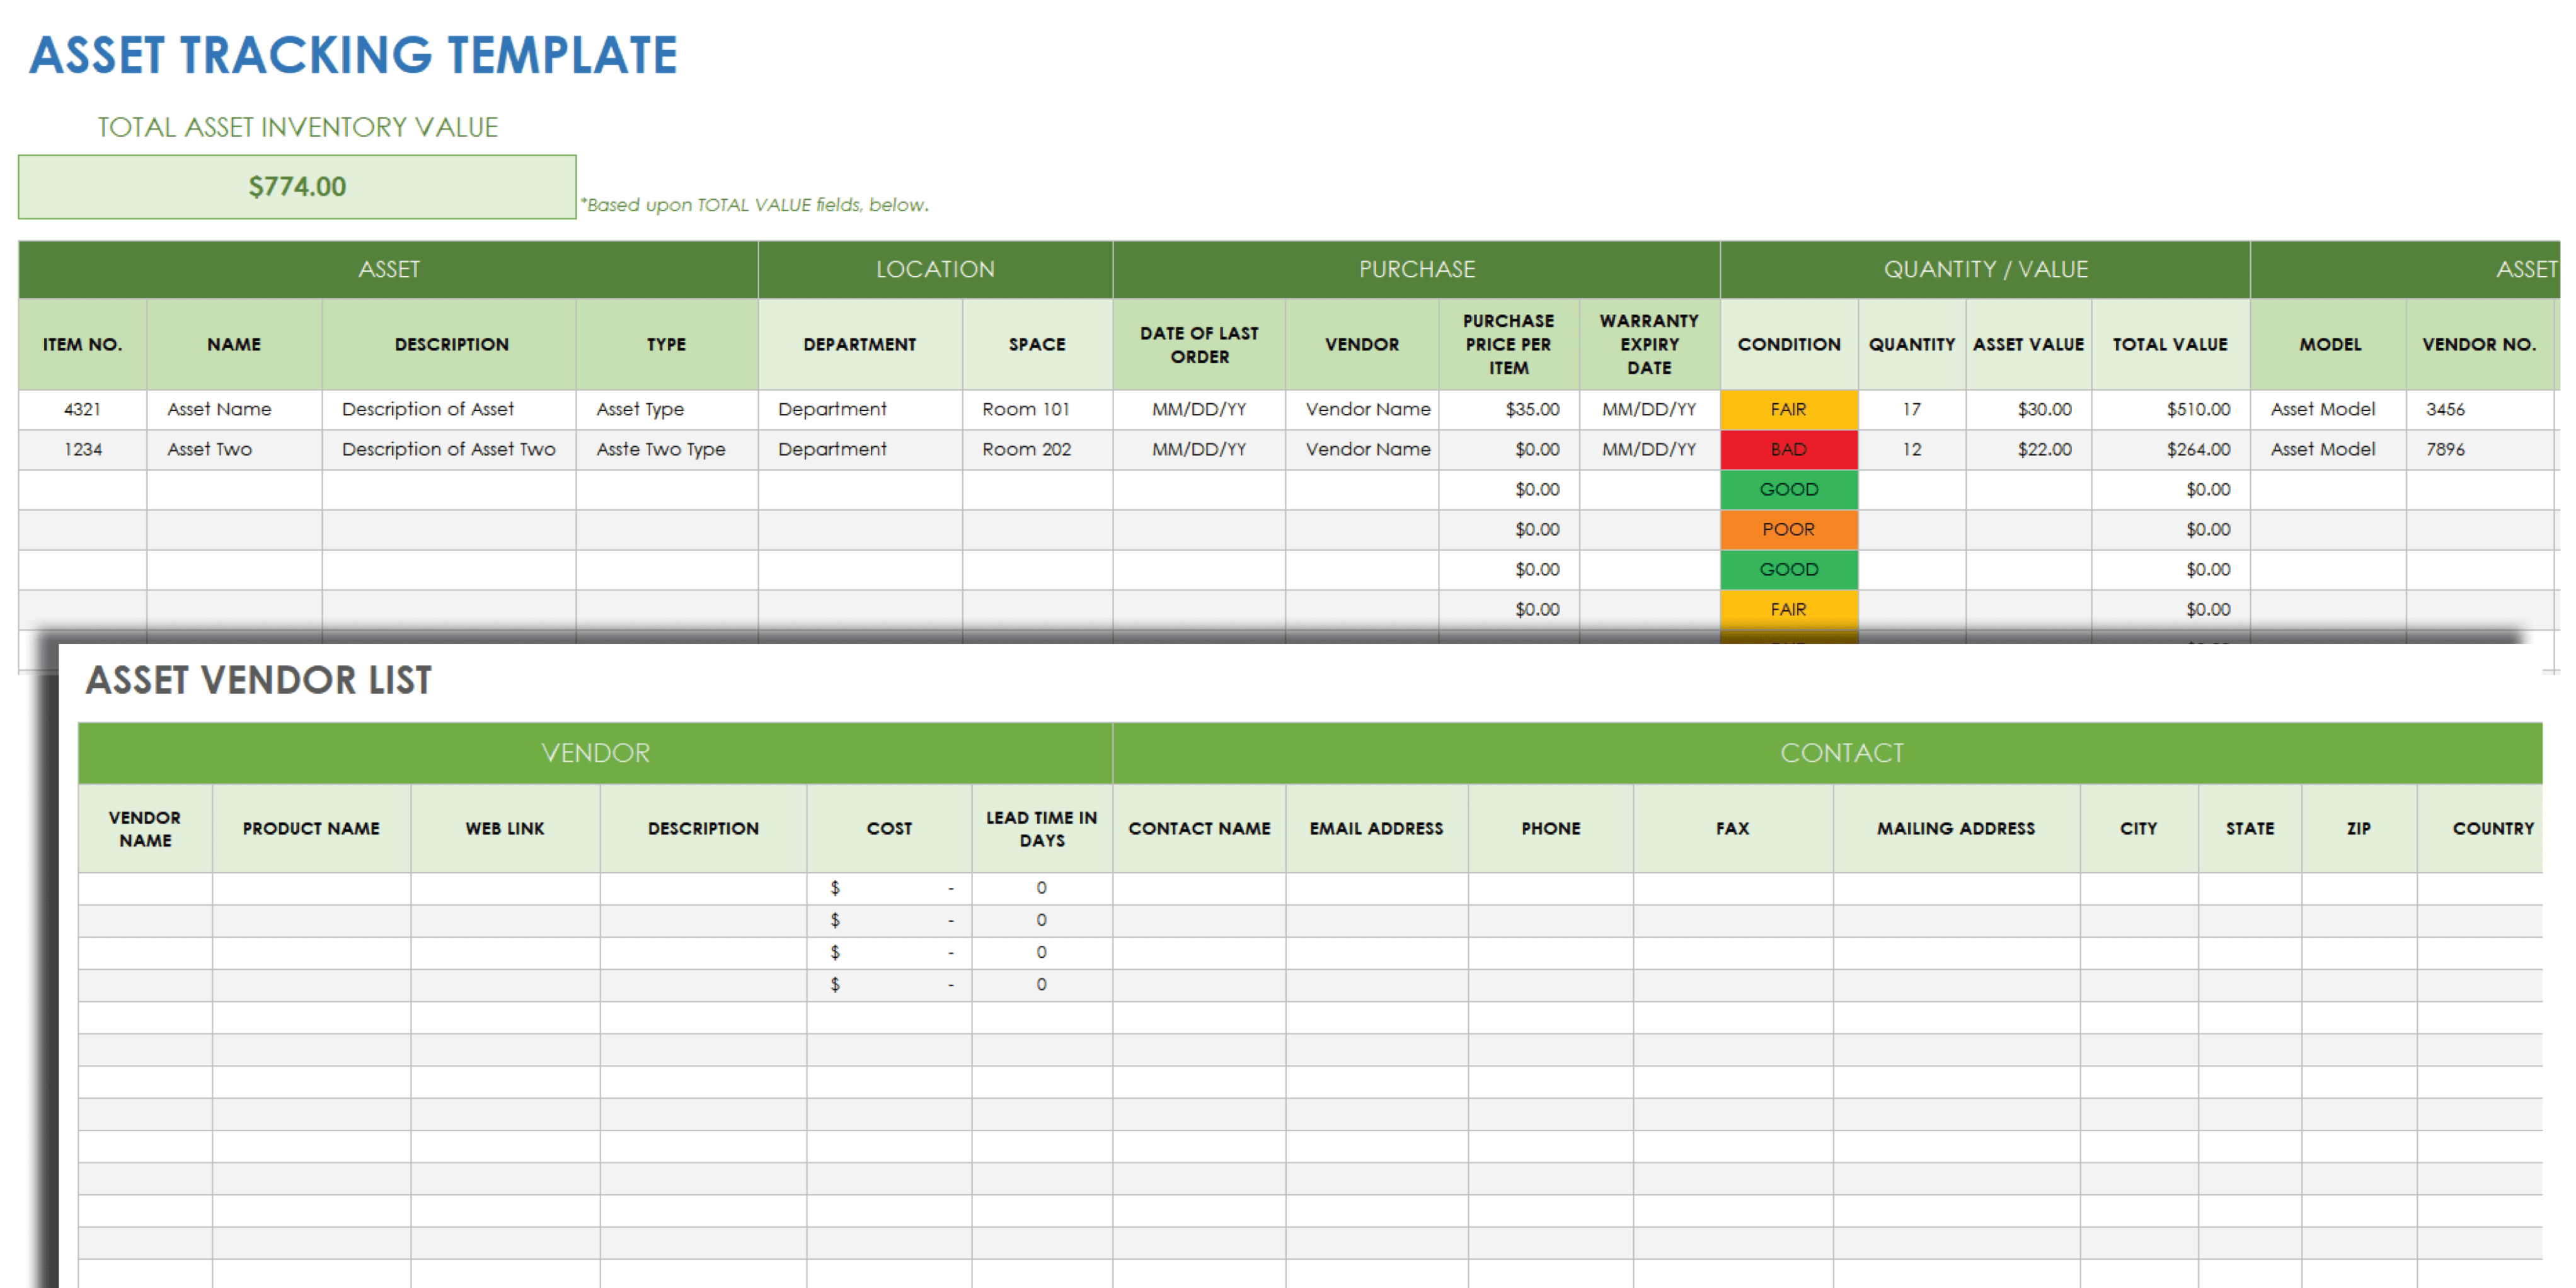 Asset Tracking Template